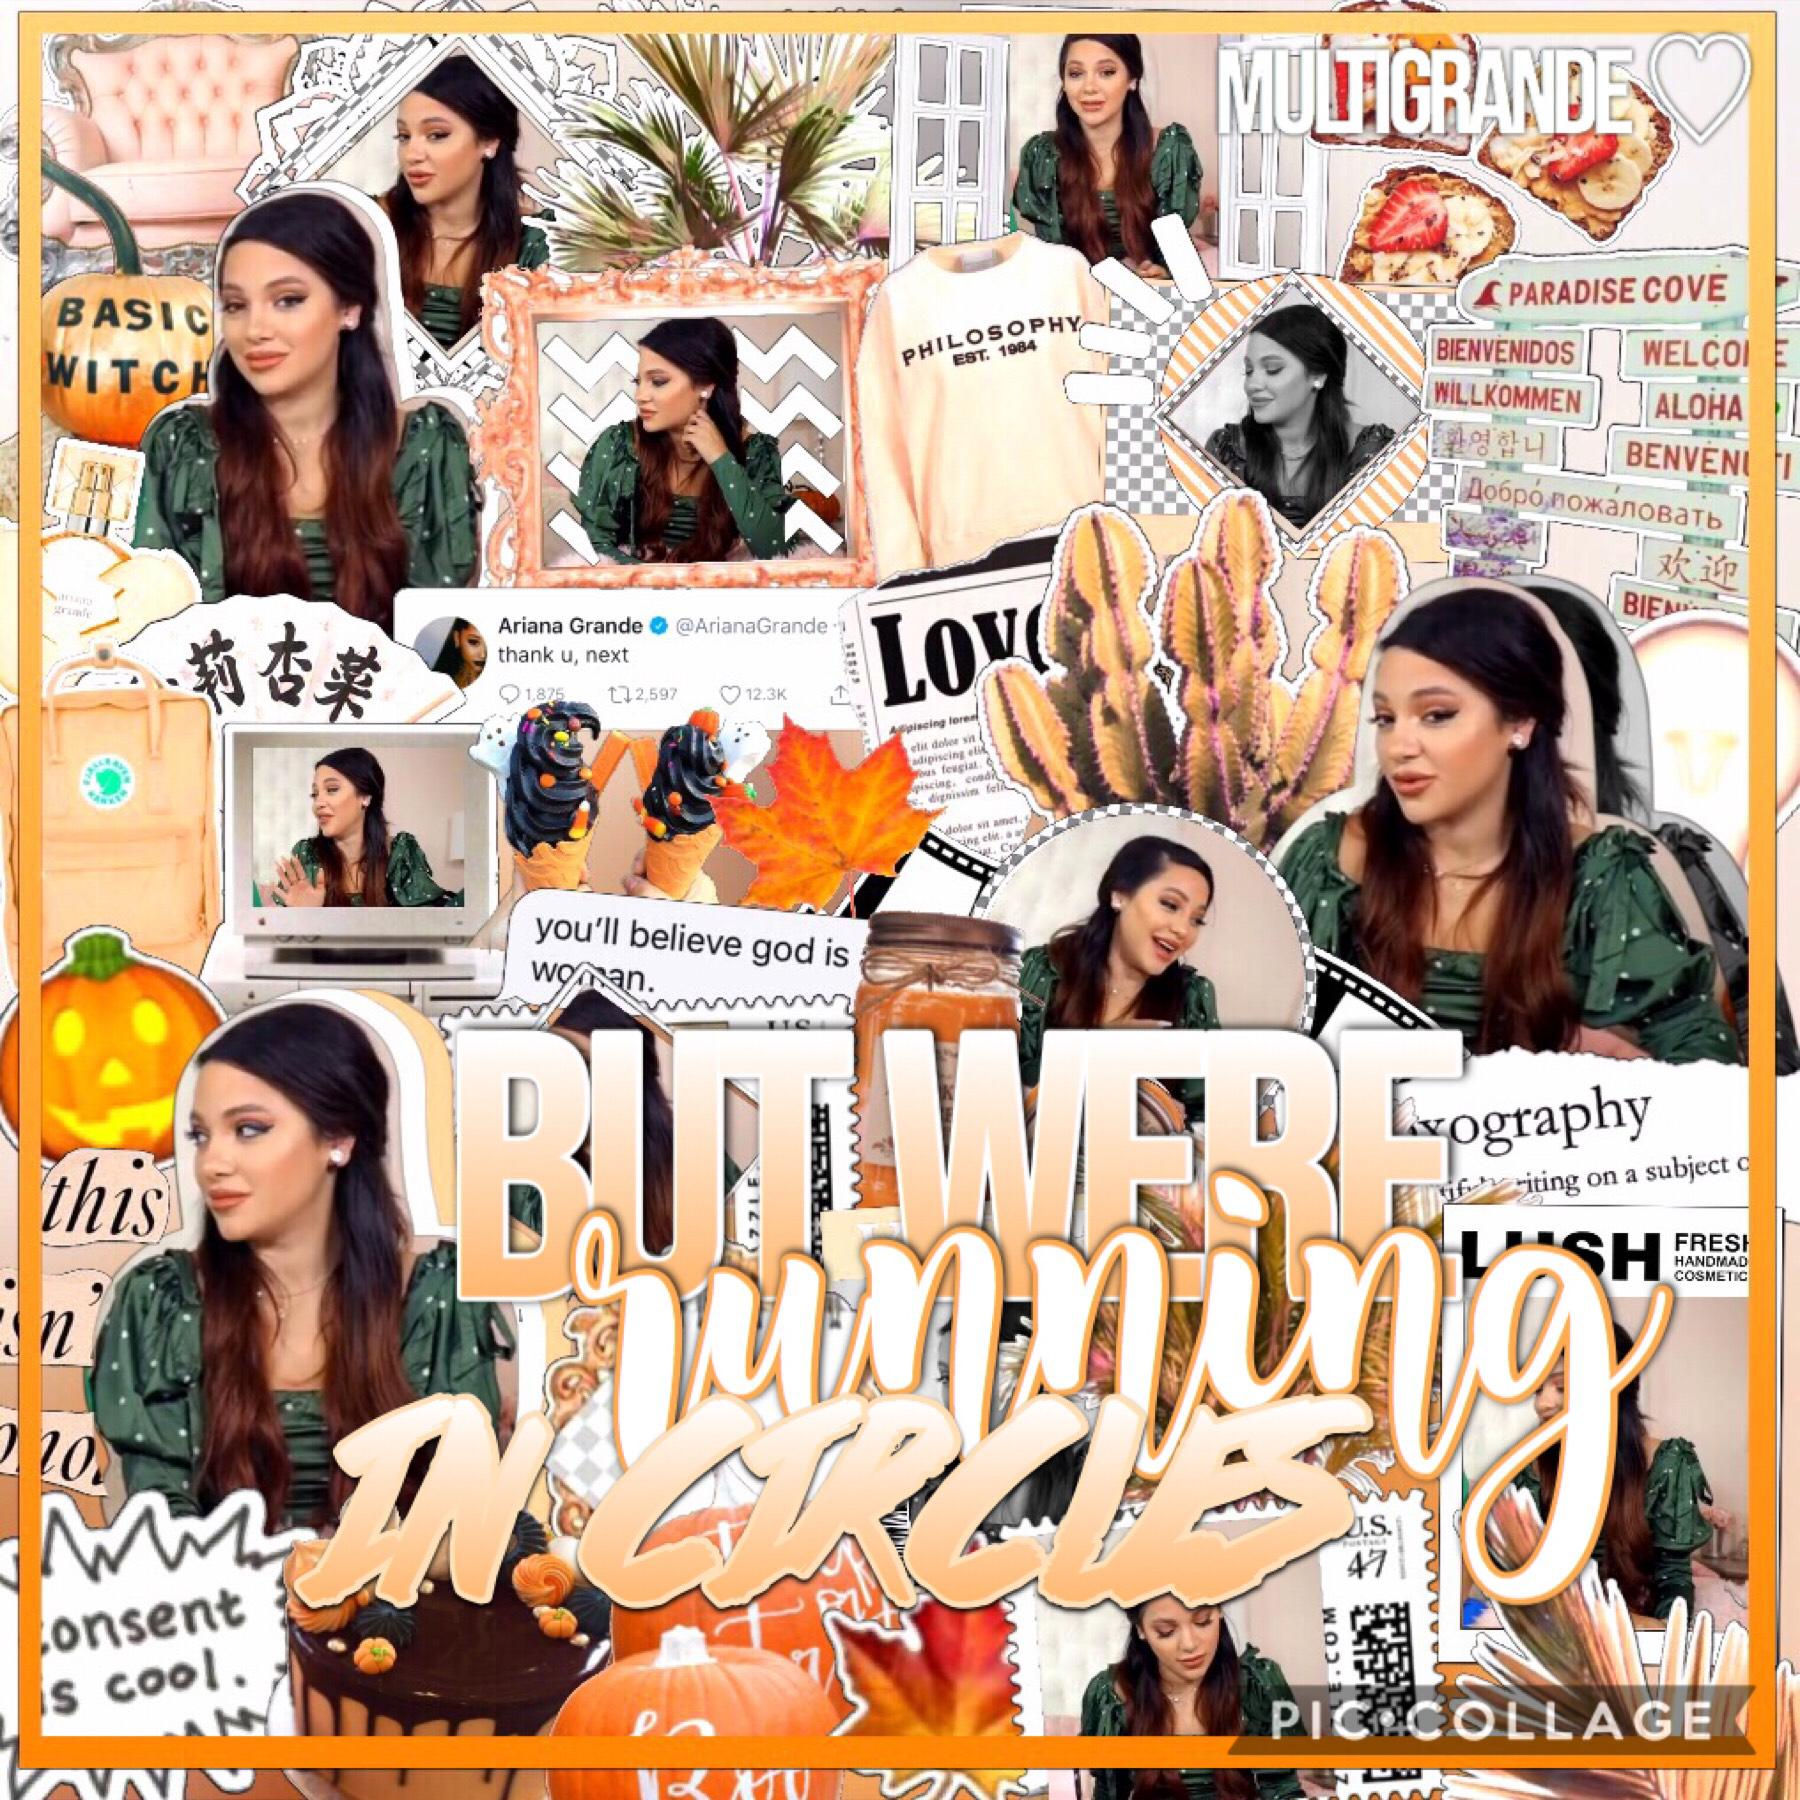 good morning! not my best but its cute🧡 excited bc im going to a pumpkin patch today!🍂🎃